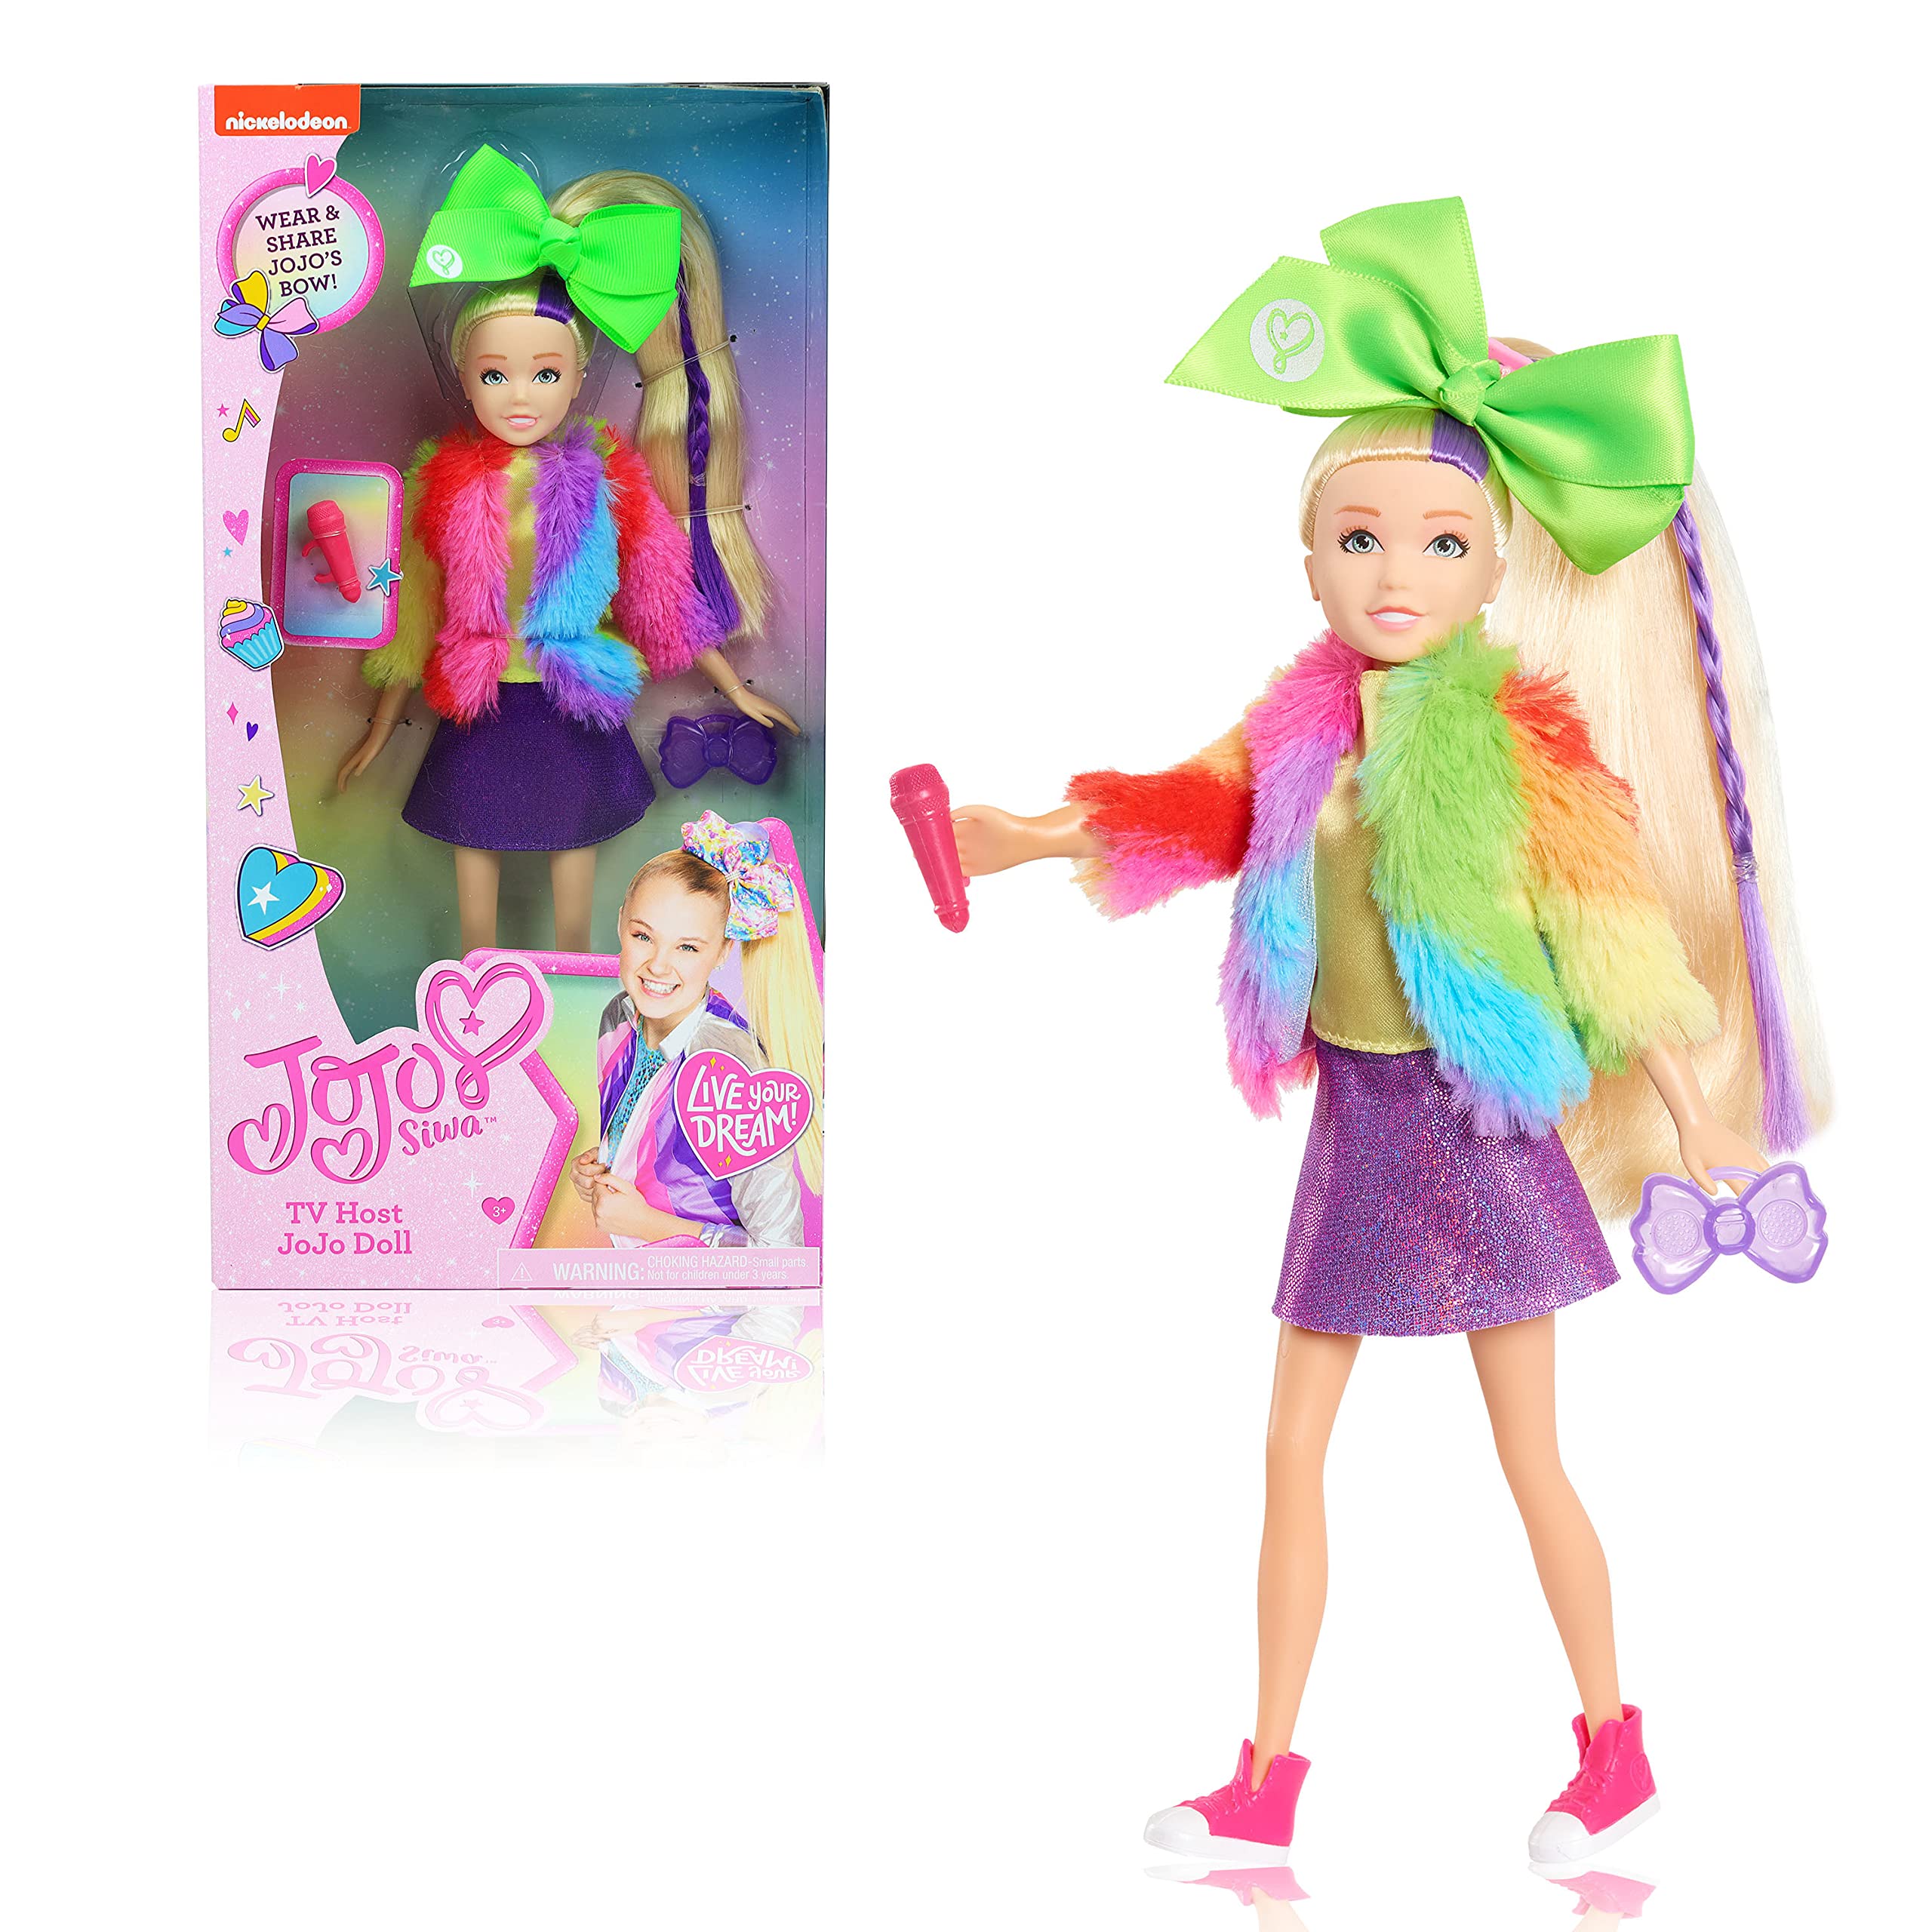 JoJo Siwa Fashion Doll, TV host, 10-inch doll, Kids Toys for Ages 3 Up, Gifts and Presents by Just Play